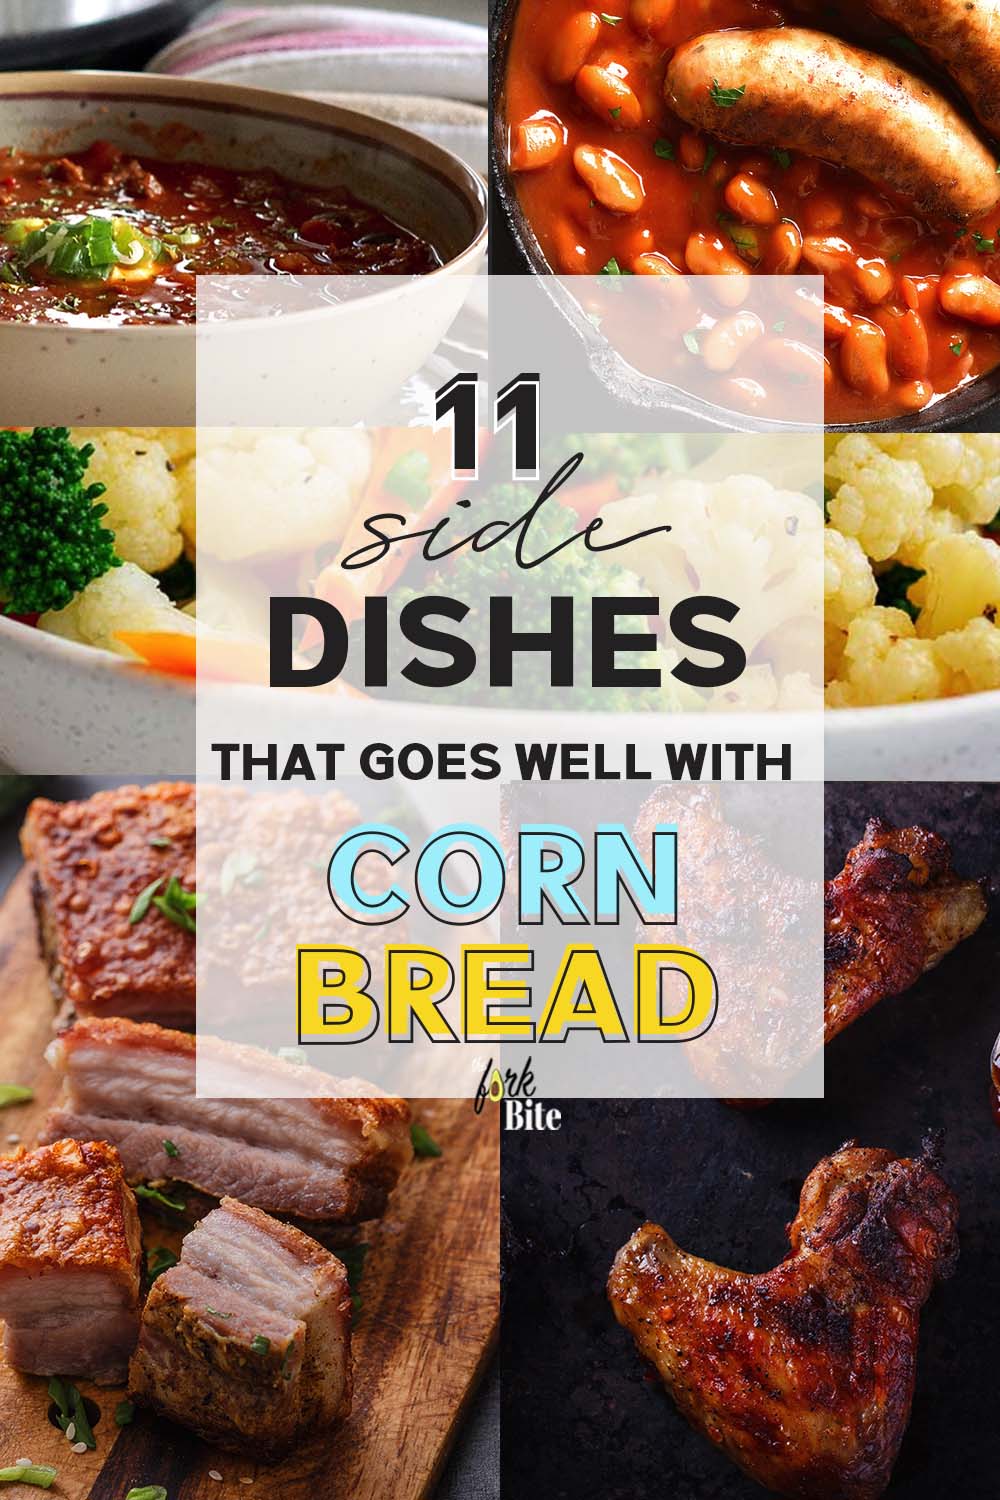 Other things that people love serving cornbread with include a bowl of spicy soup, a tasty stew, or a plate of beans. But let’s push the boundaries a bit with a few new ideas.